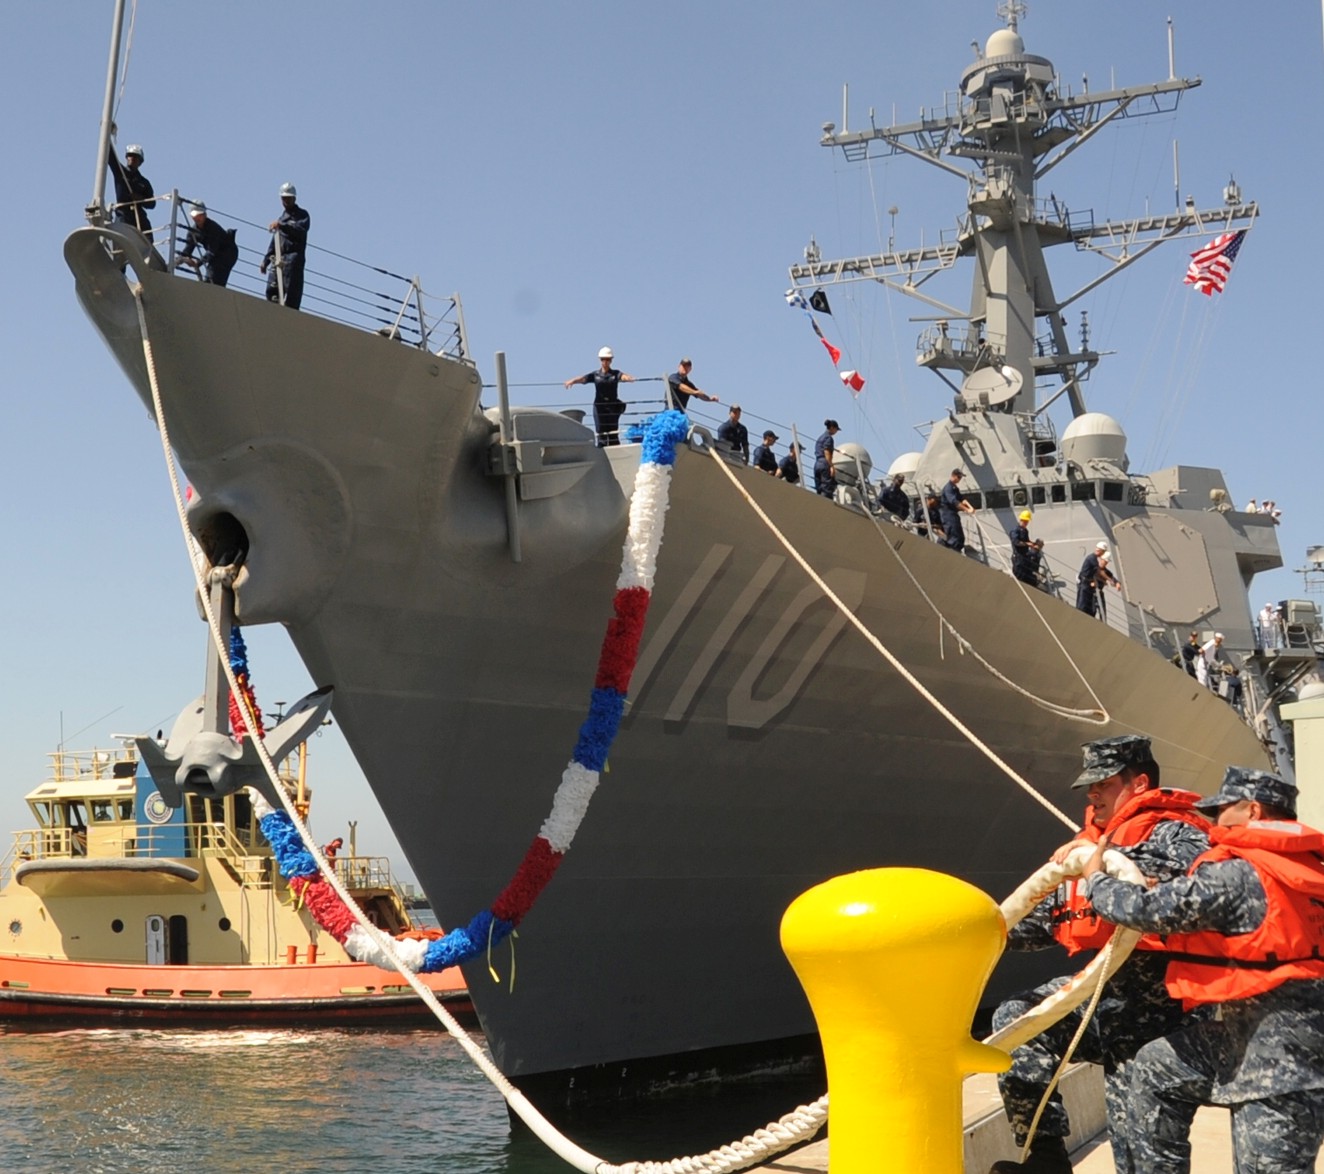 ddg-110 uss william p. lawrence arleigh burke class guided missile destroyer aegis us navy arriving san diego california 02